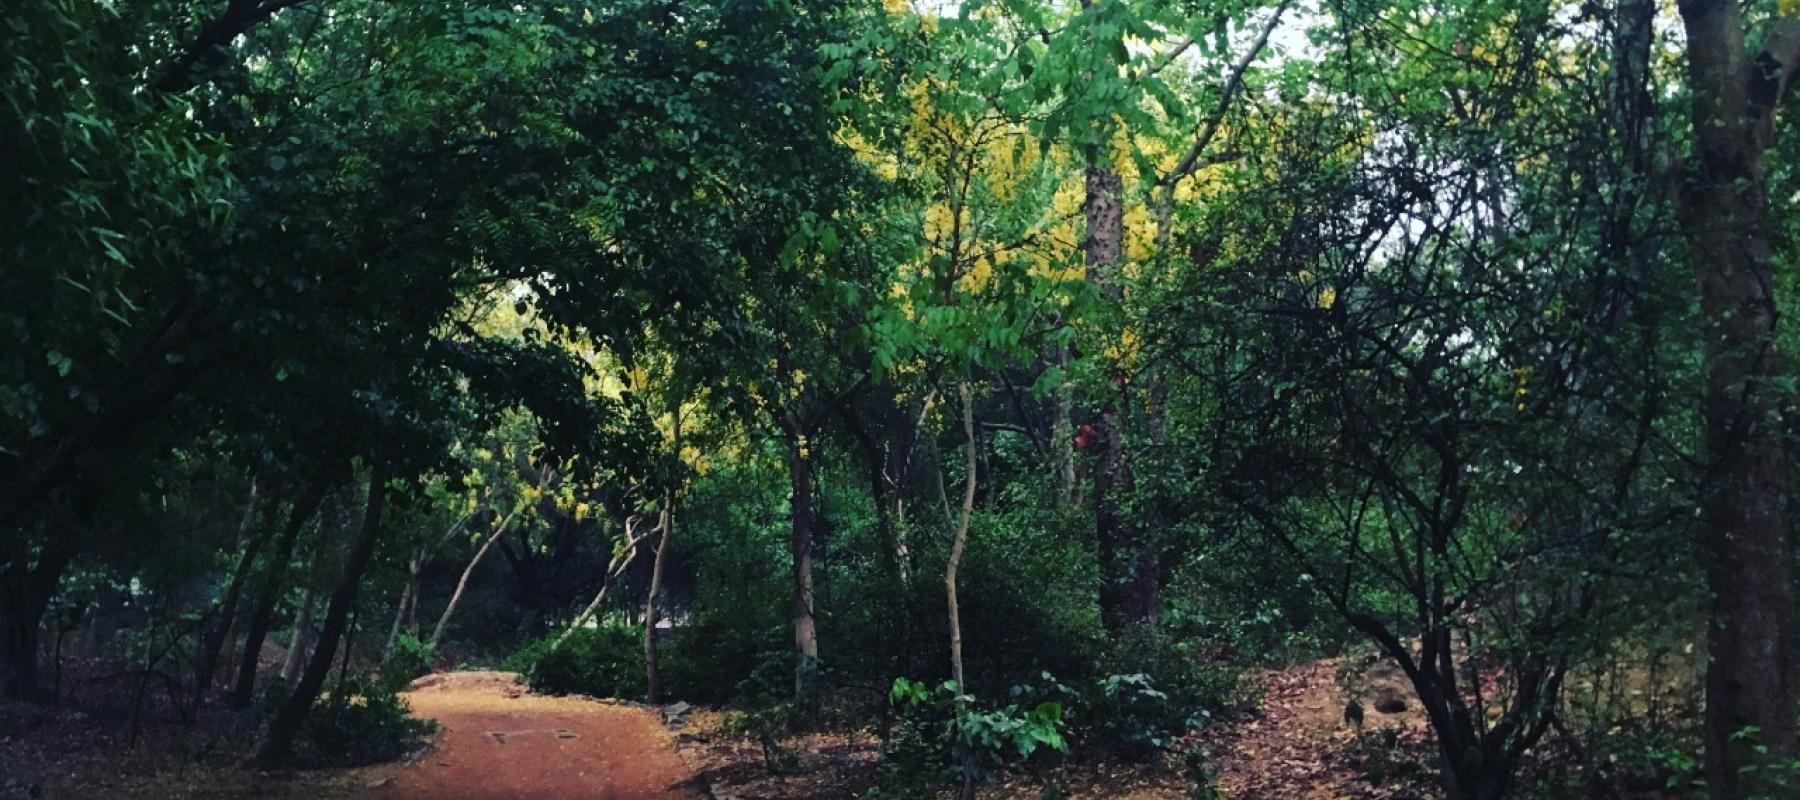 Celebrating World Heritage Day - A Nature Trail to Sanjay Van Forest |  India Heritage Walks